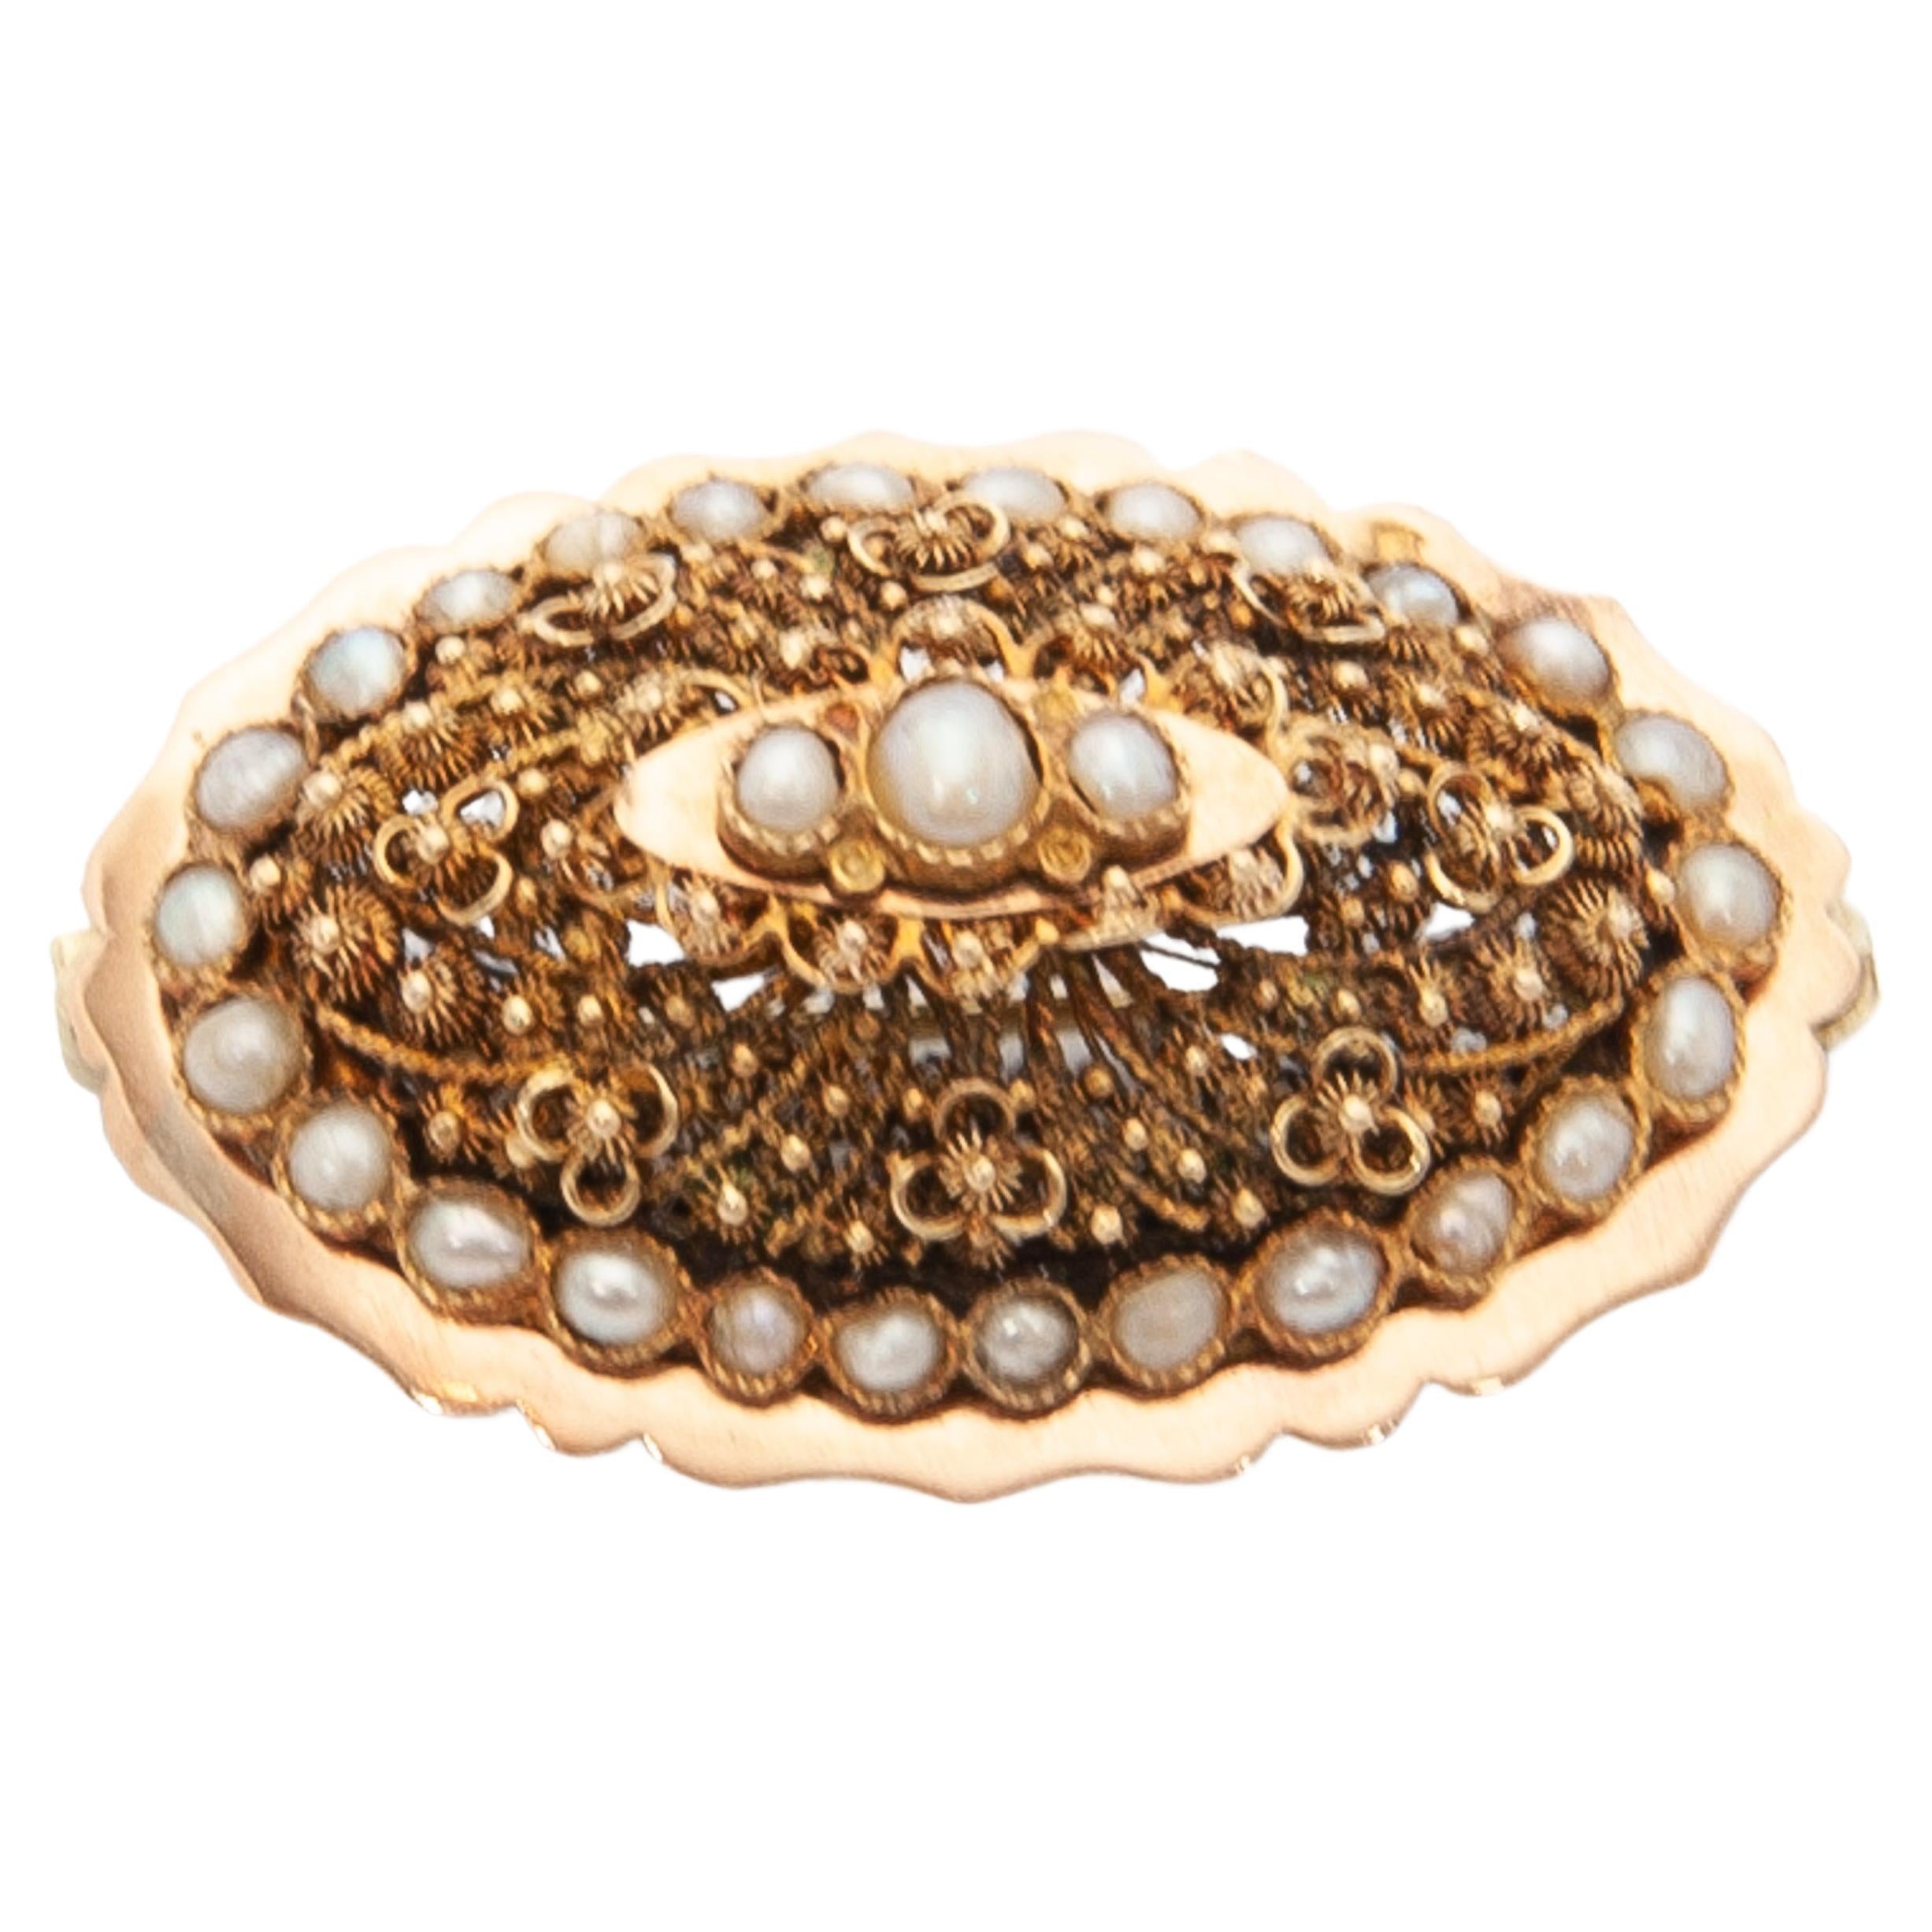 19th Century 18 Karat Gold Cannetille and Seed Pearl Brooch